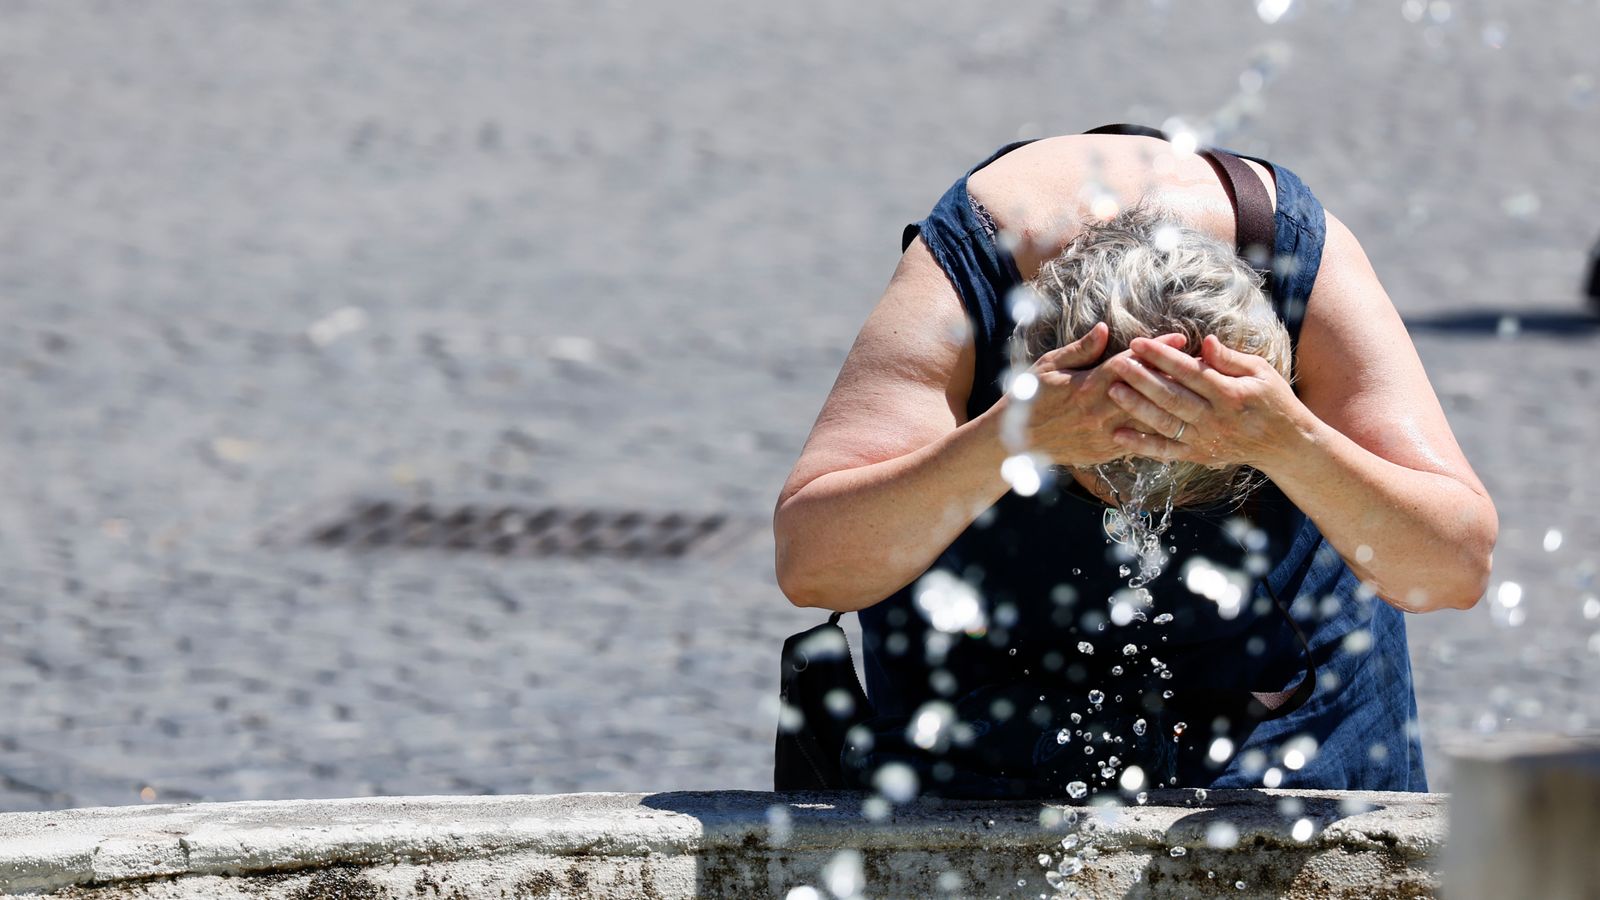 How hot it is in Greece, Spain, Portugal, France, and other parts of Europe?